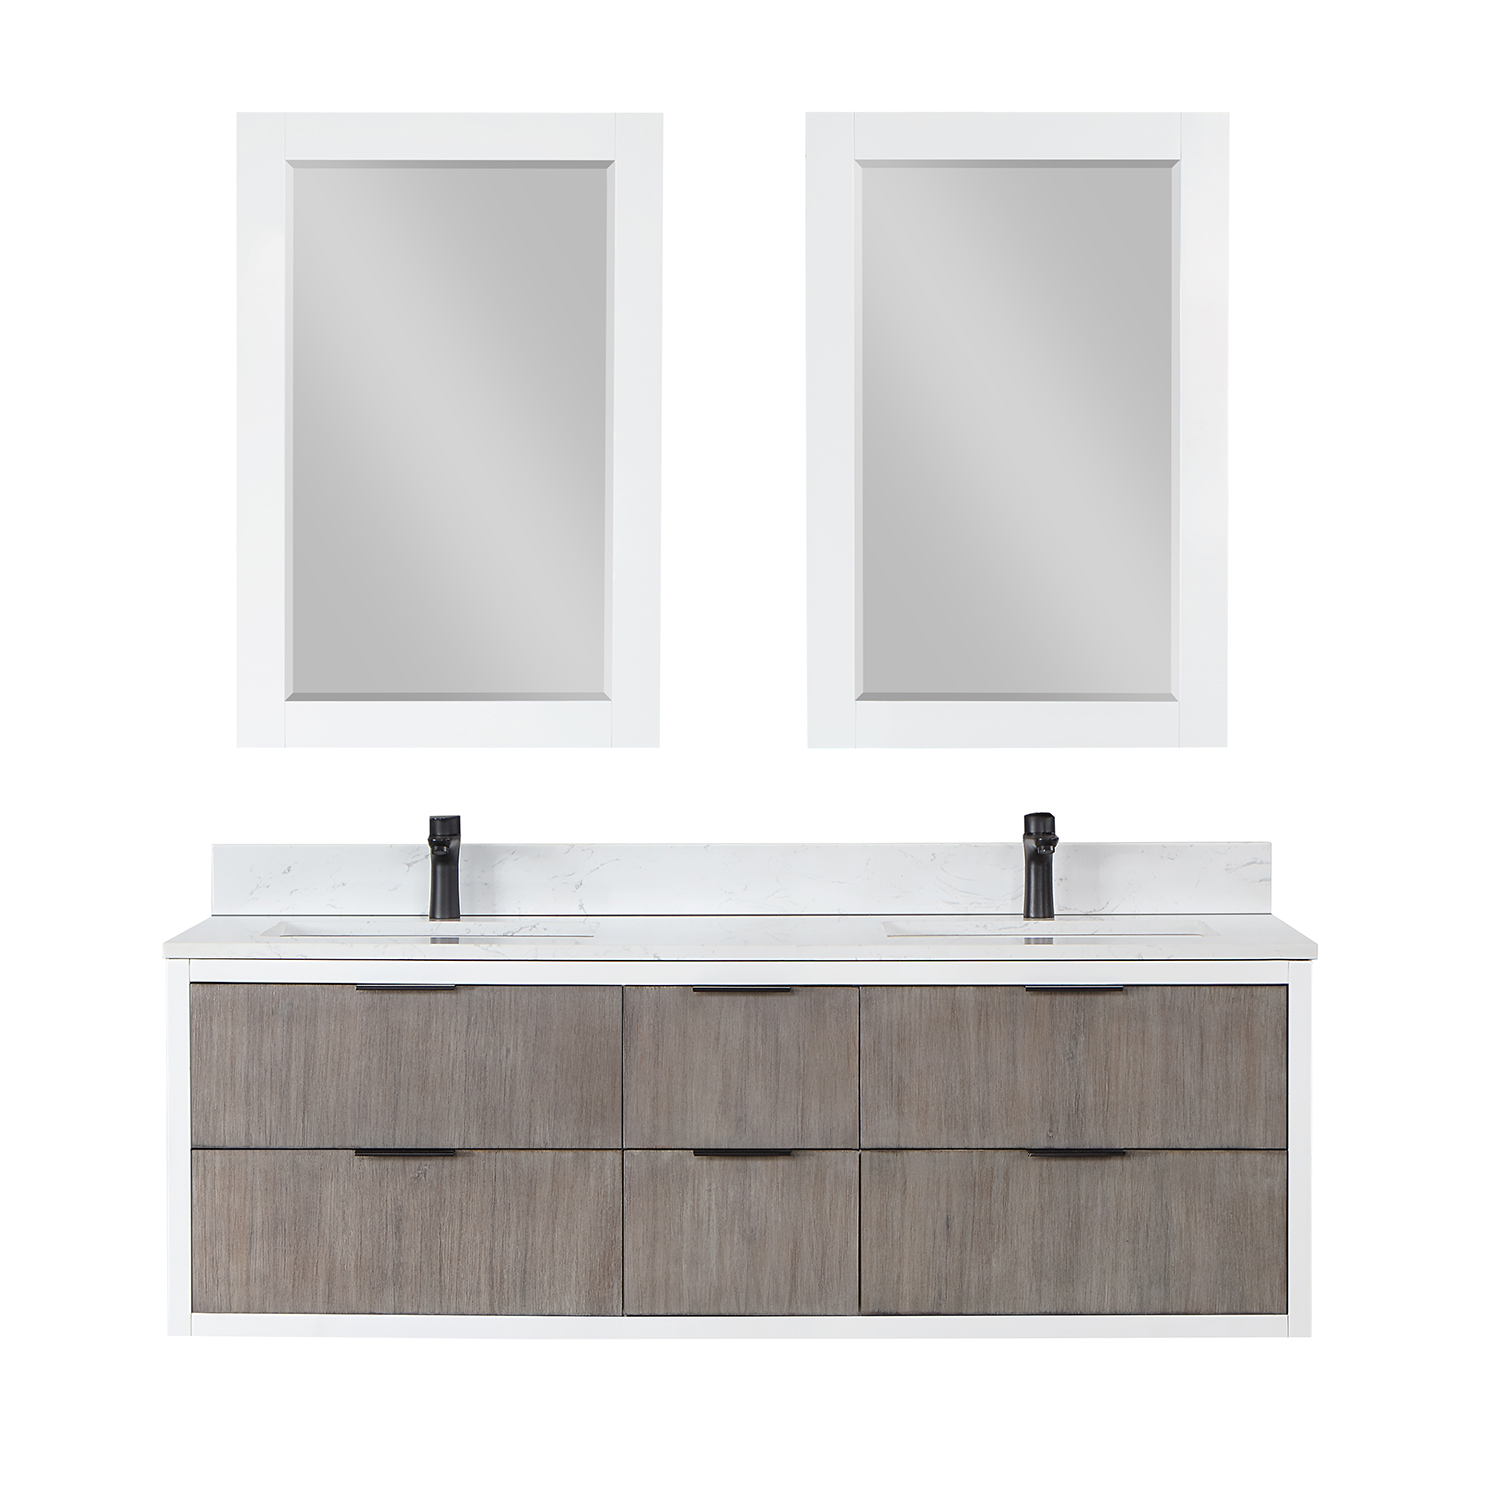 Issac Edwards Collection 60" Double Bathroom Vanity in Classical Gray with Carrara White Composite Stone Countertop without Mirror 